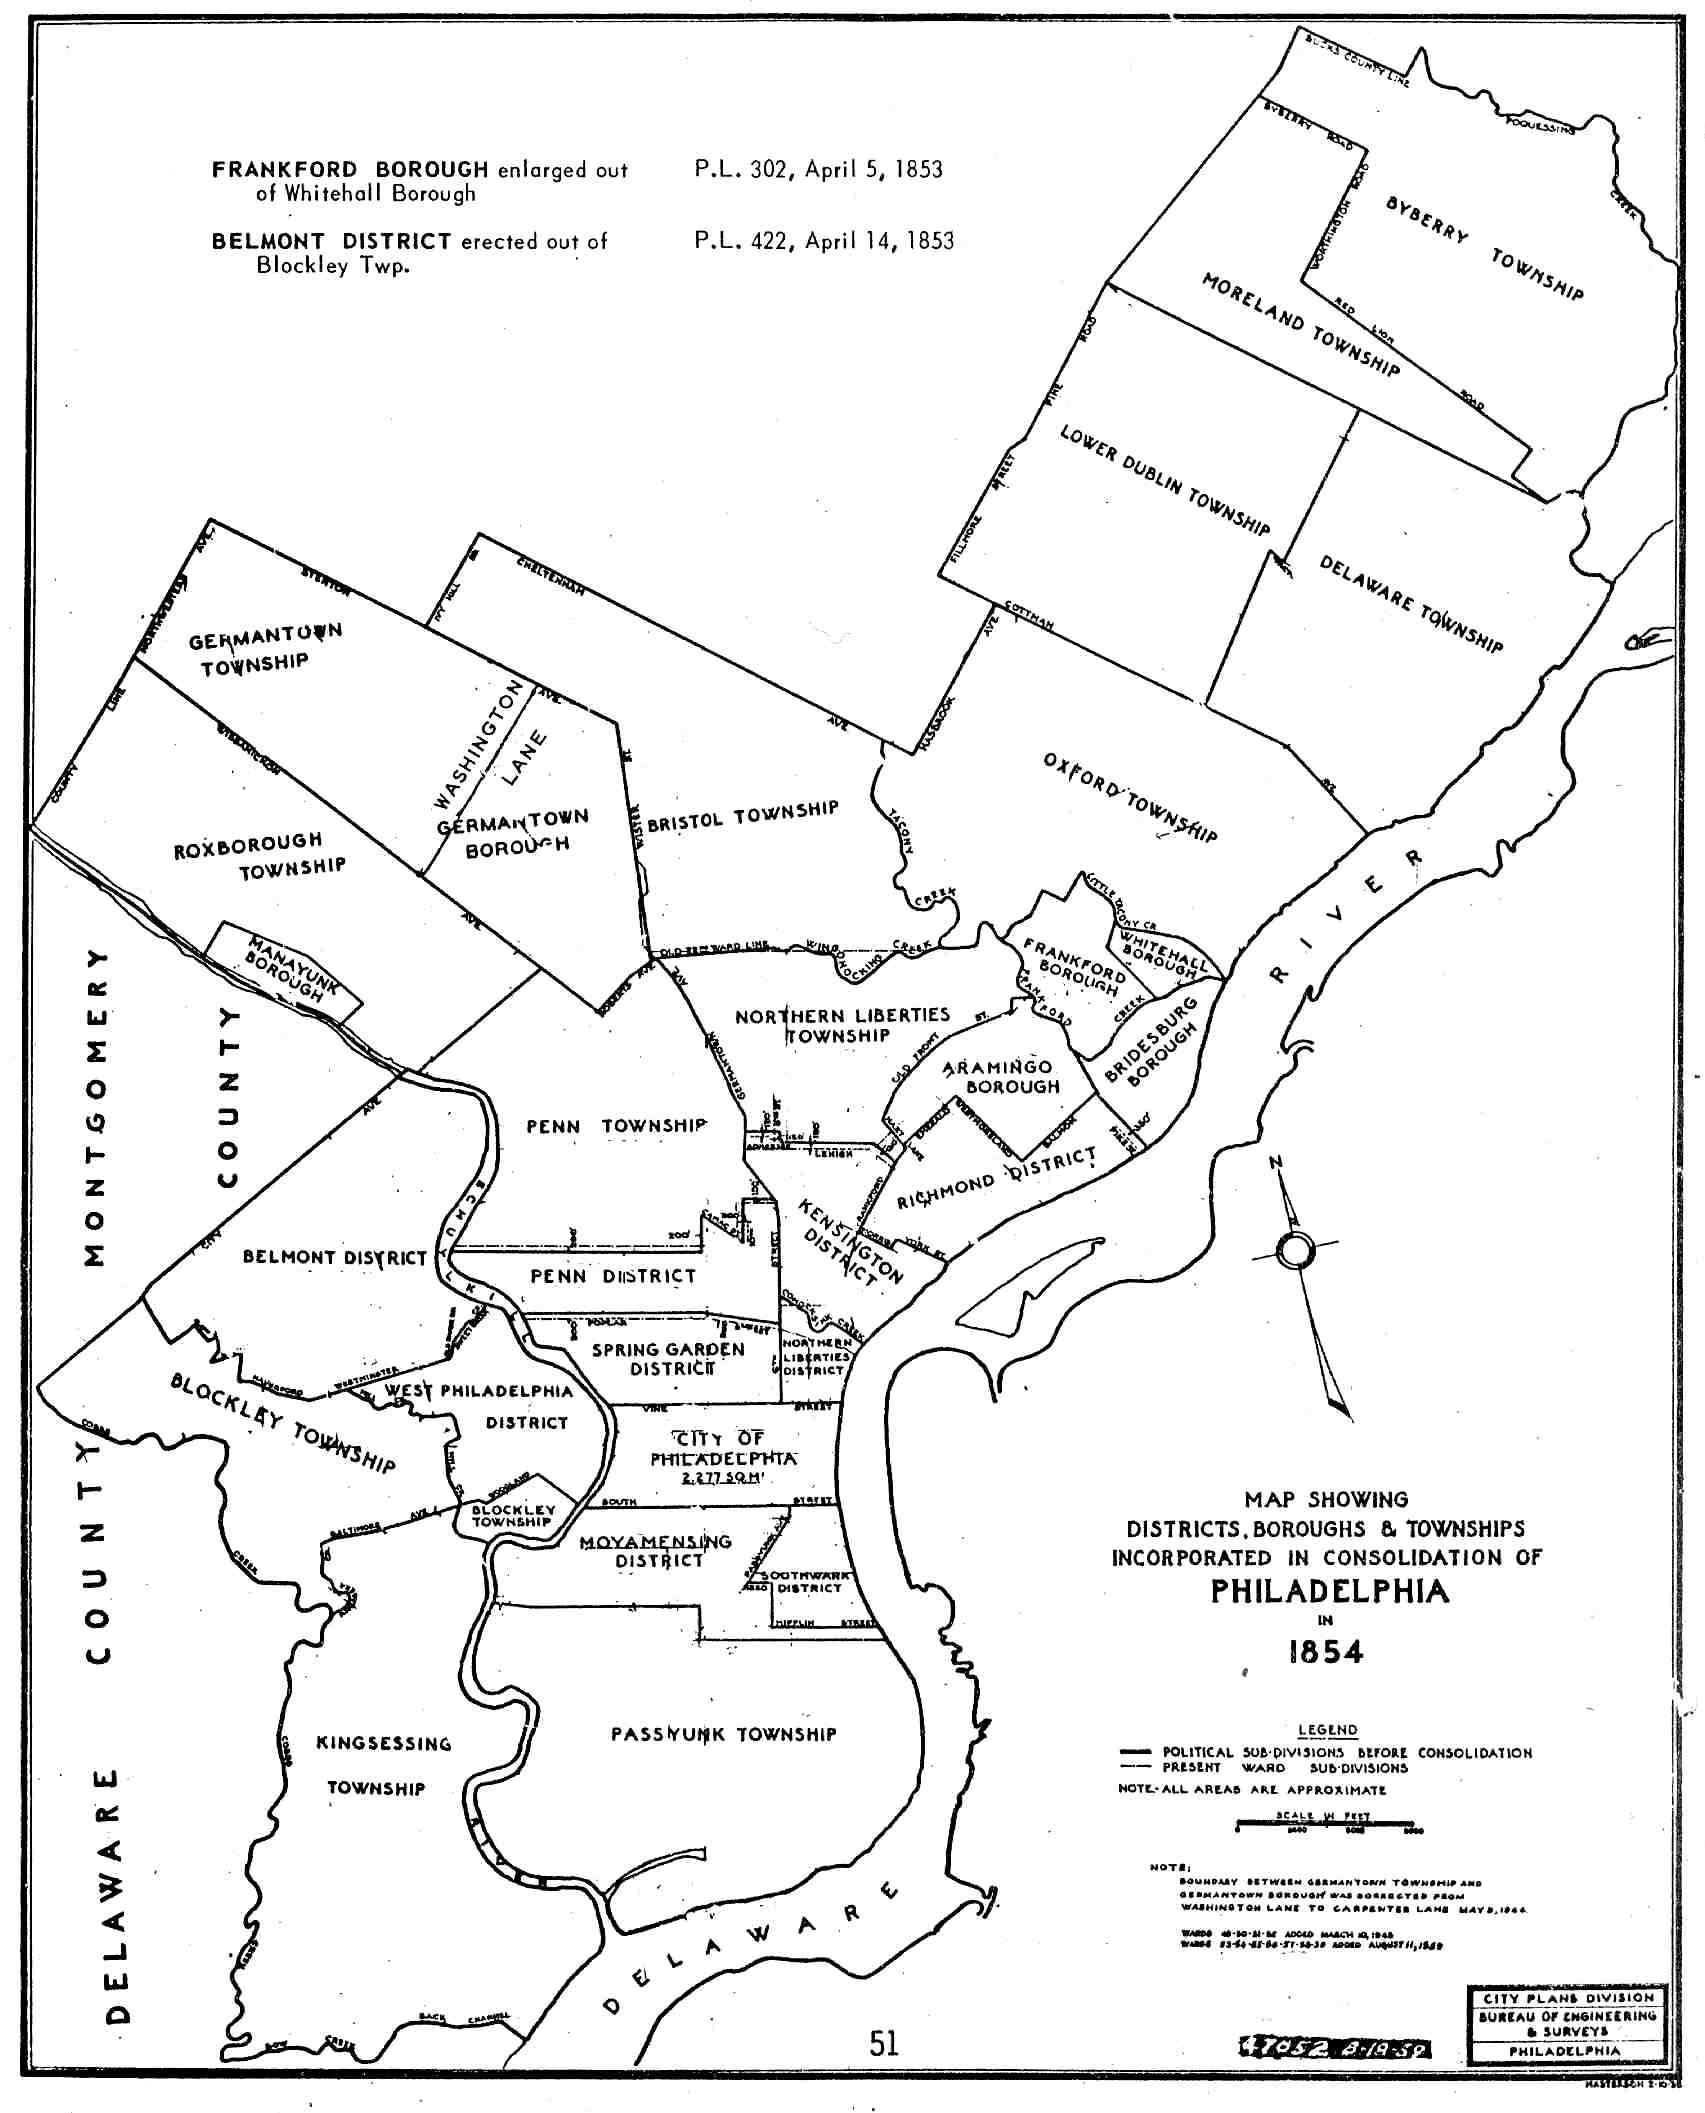 Map of Districts, Boroughs & Townships Incorporated in  1854 Consolidation of Philadelphia